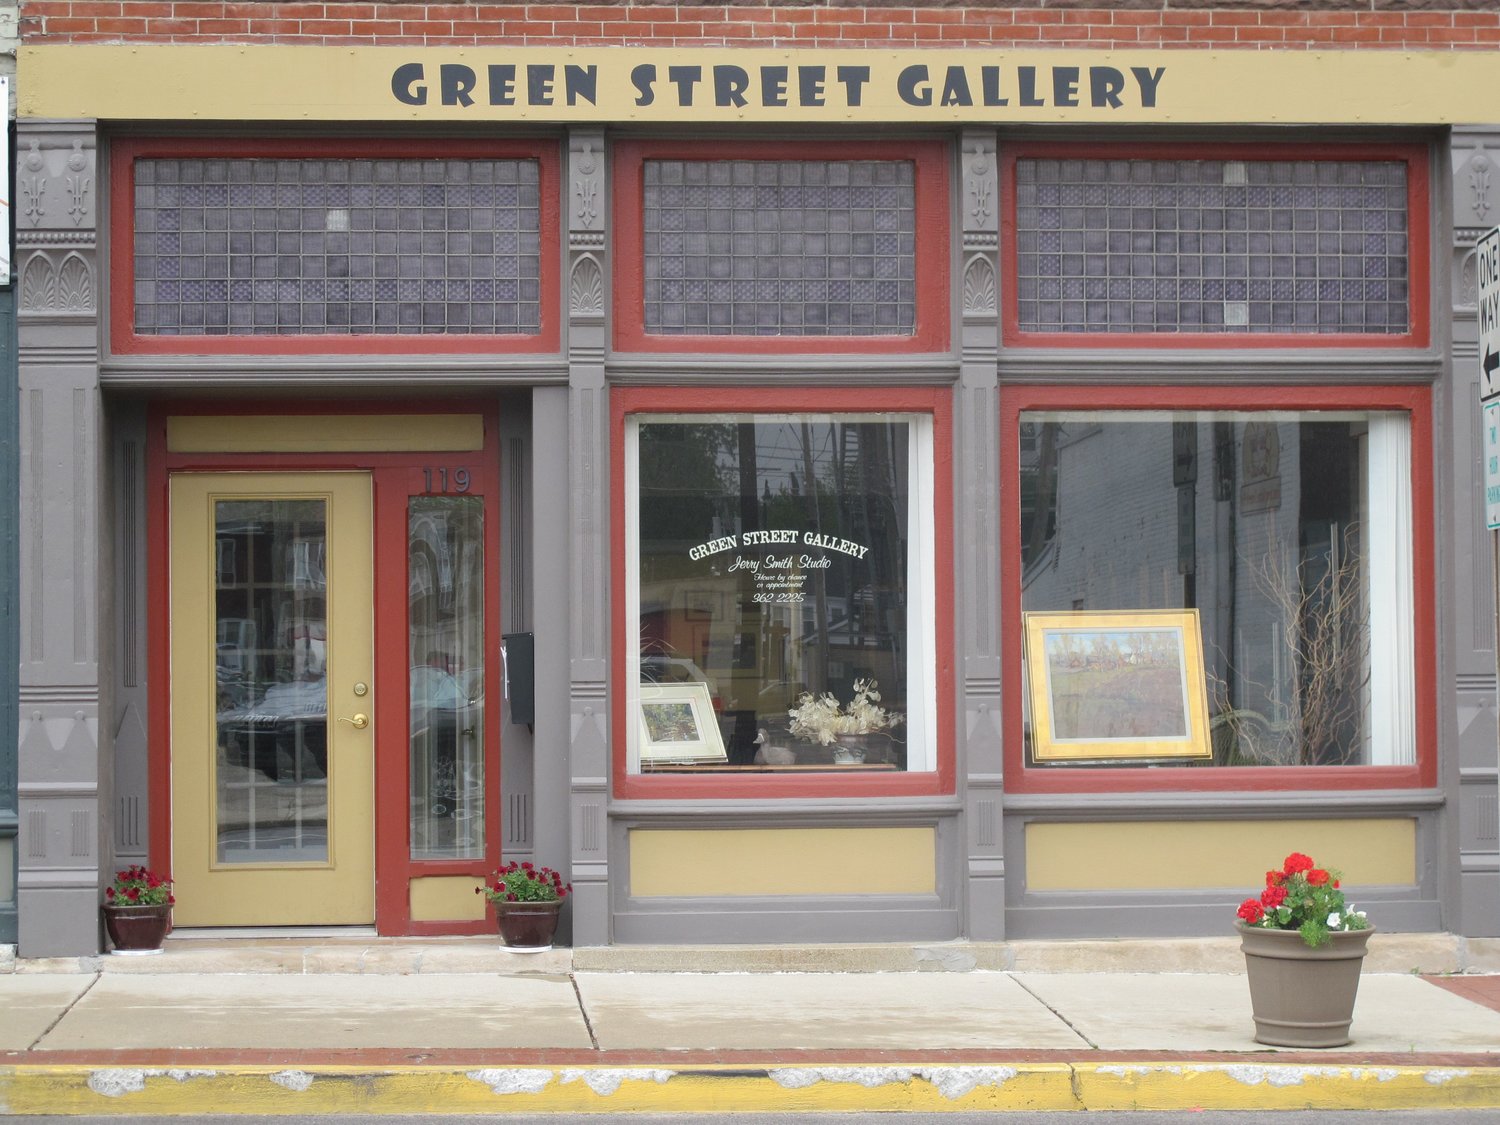 Jerry Smith operates the Green Street Gallery and Studio in downtown Crawfordsville.